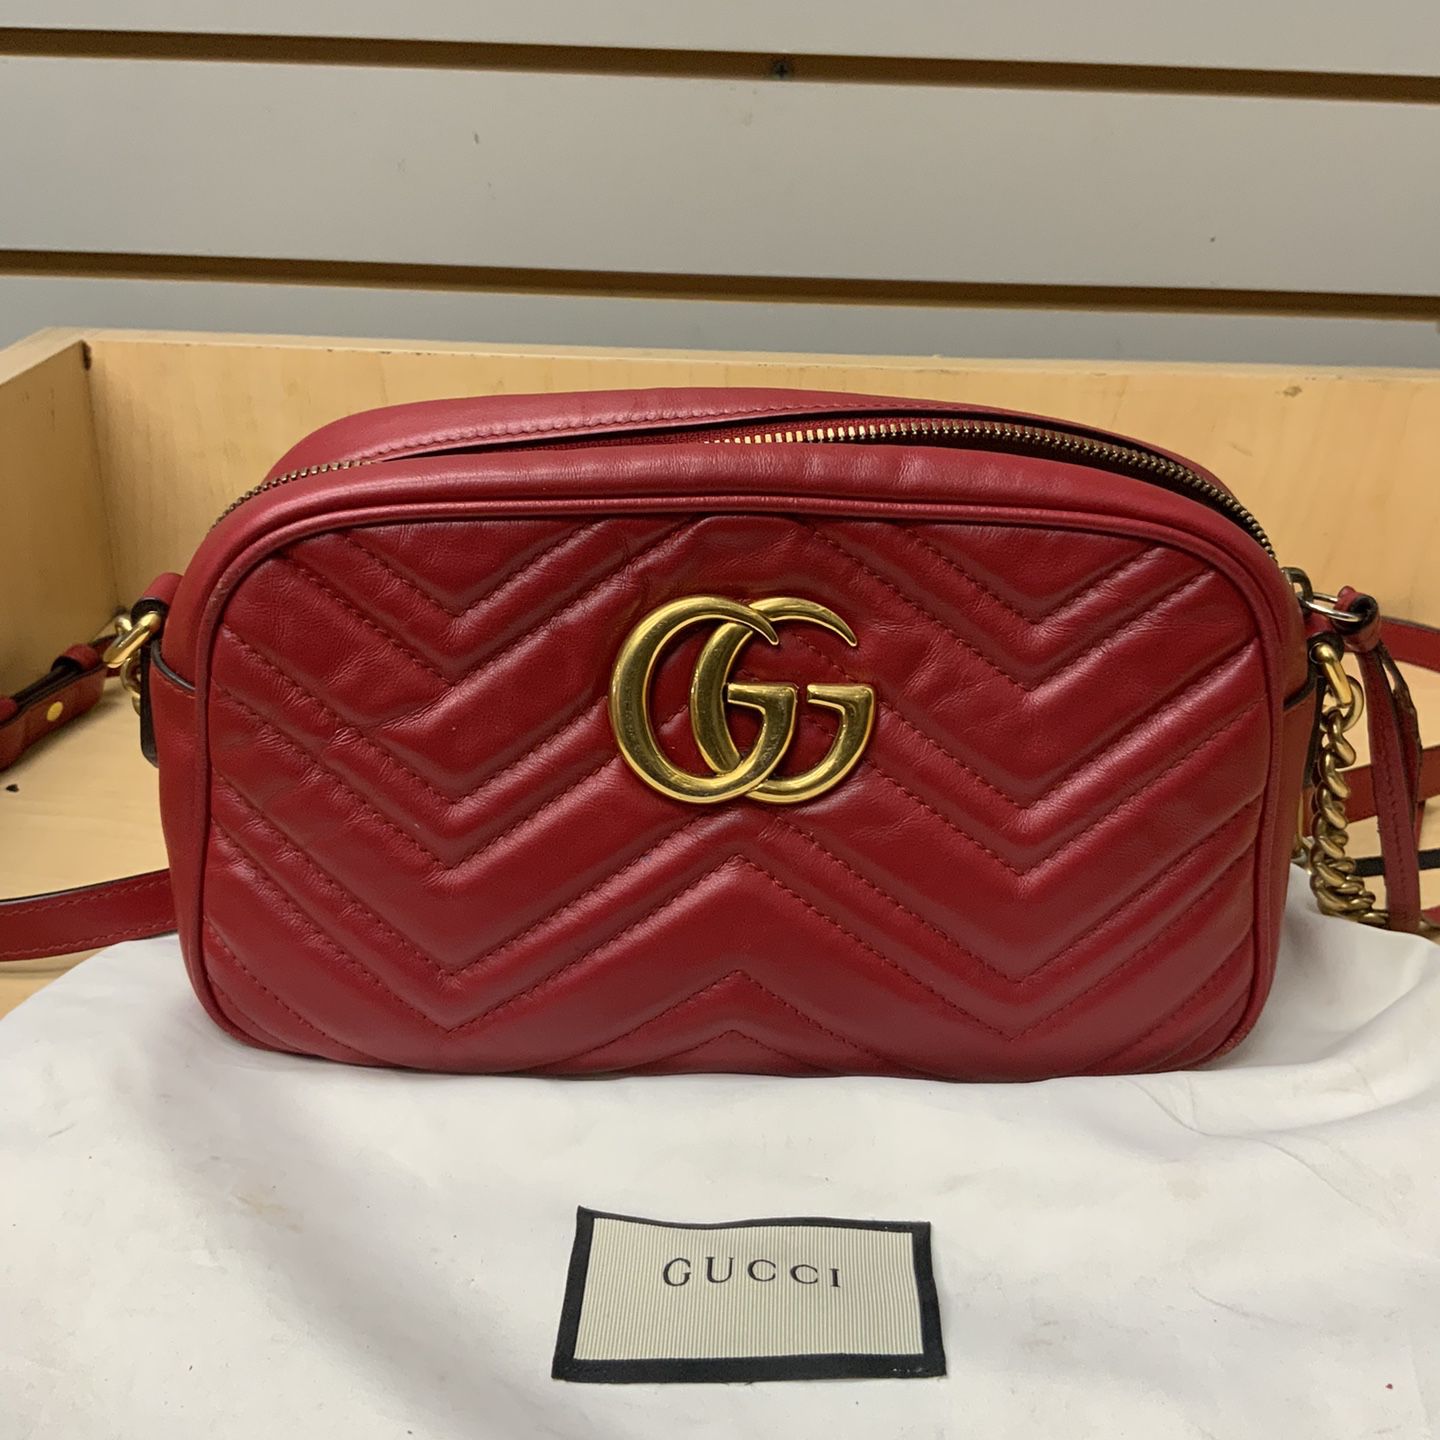 GUCCI GG Marmont Medium Leather Chain Shoulder Bag Red 447632 Auth. Dust Bag Included 